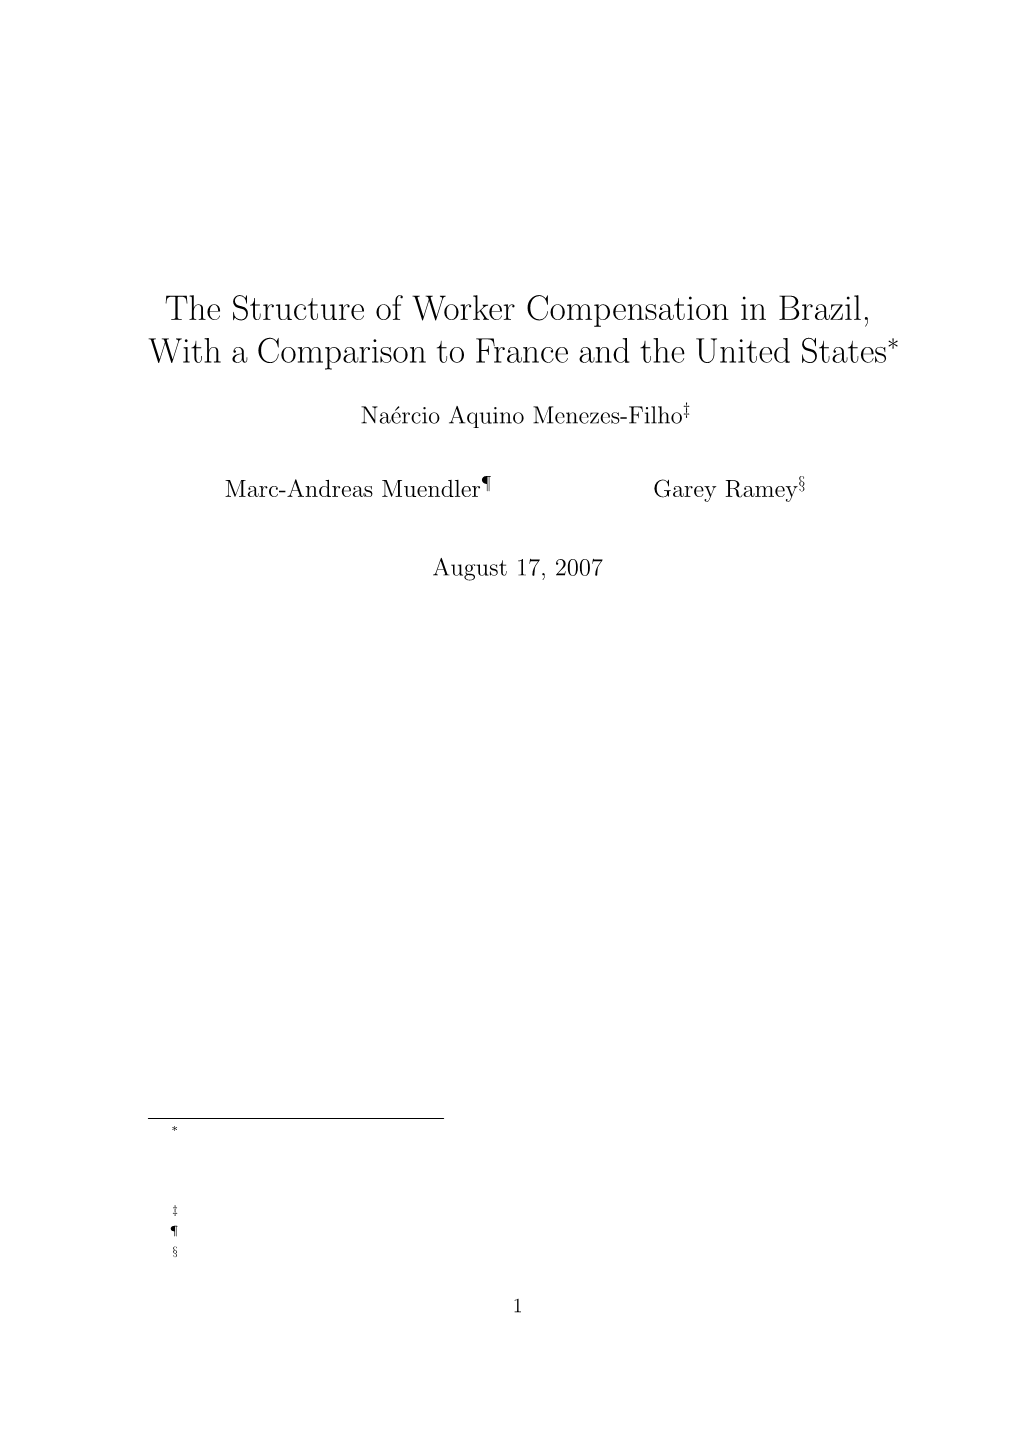 The Structure of Worker Compensation in Brazil, with a Comparison to France and the United States∗